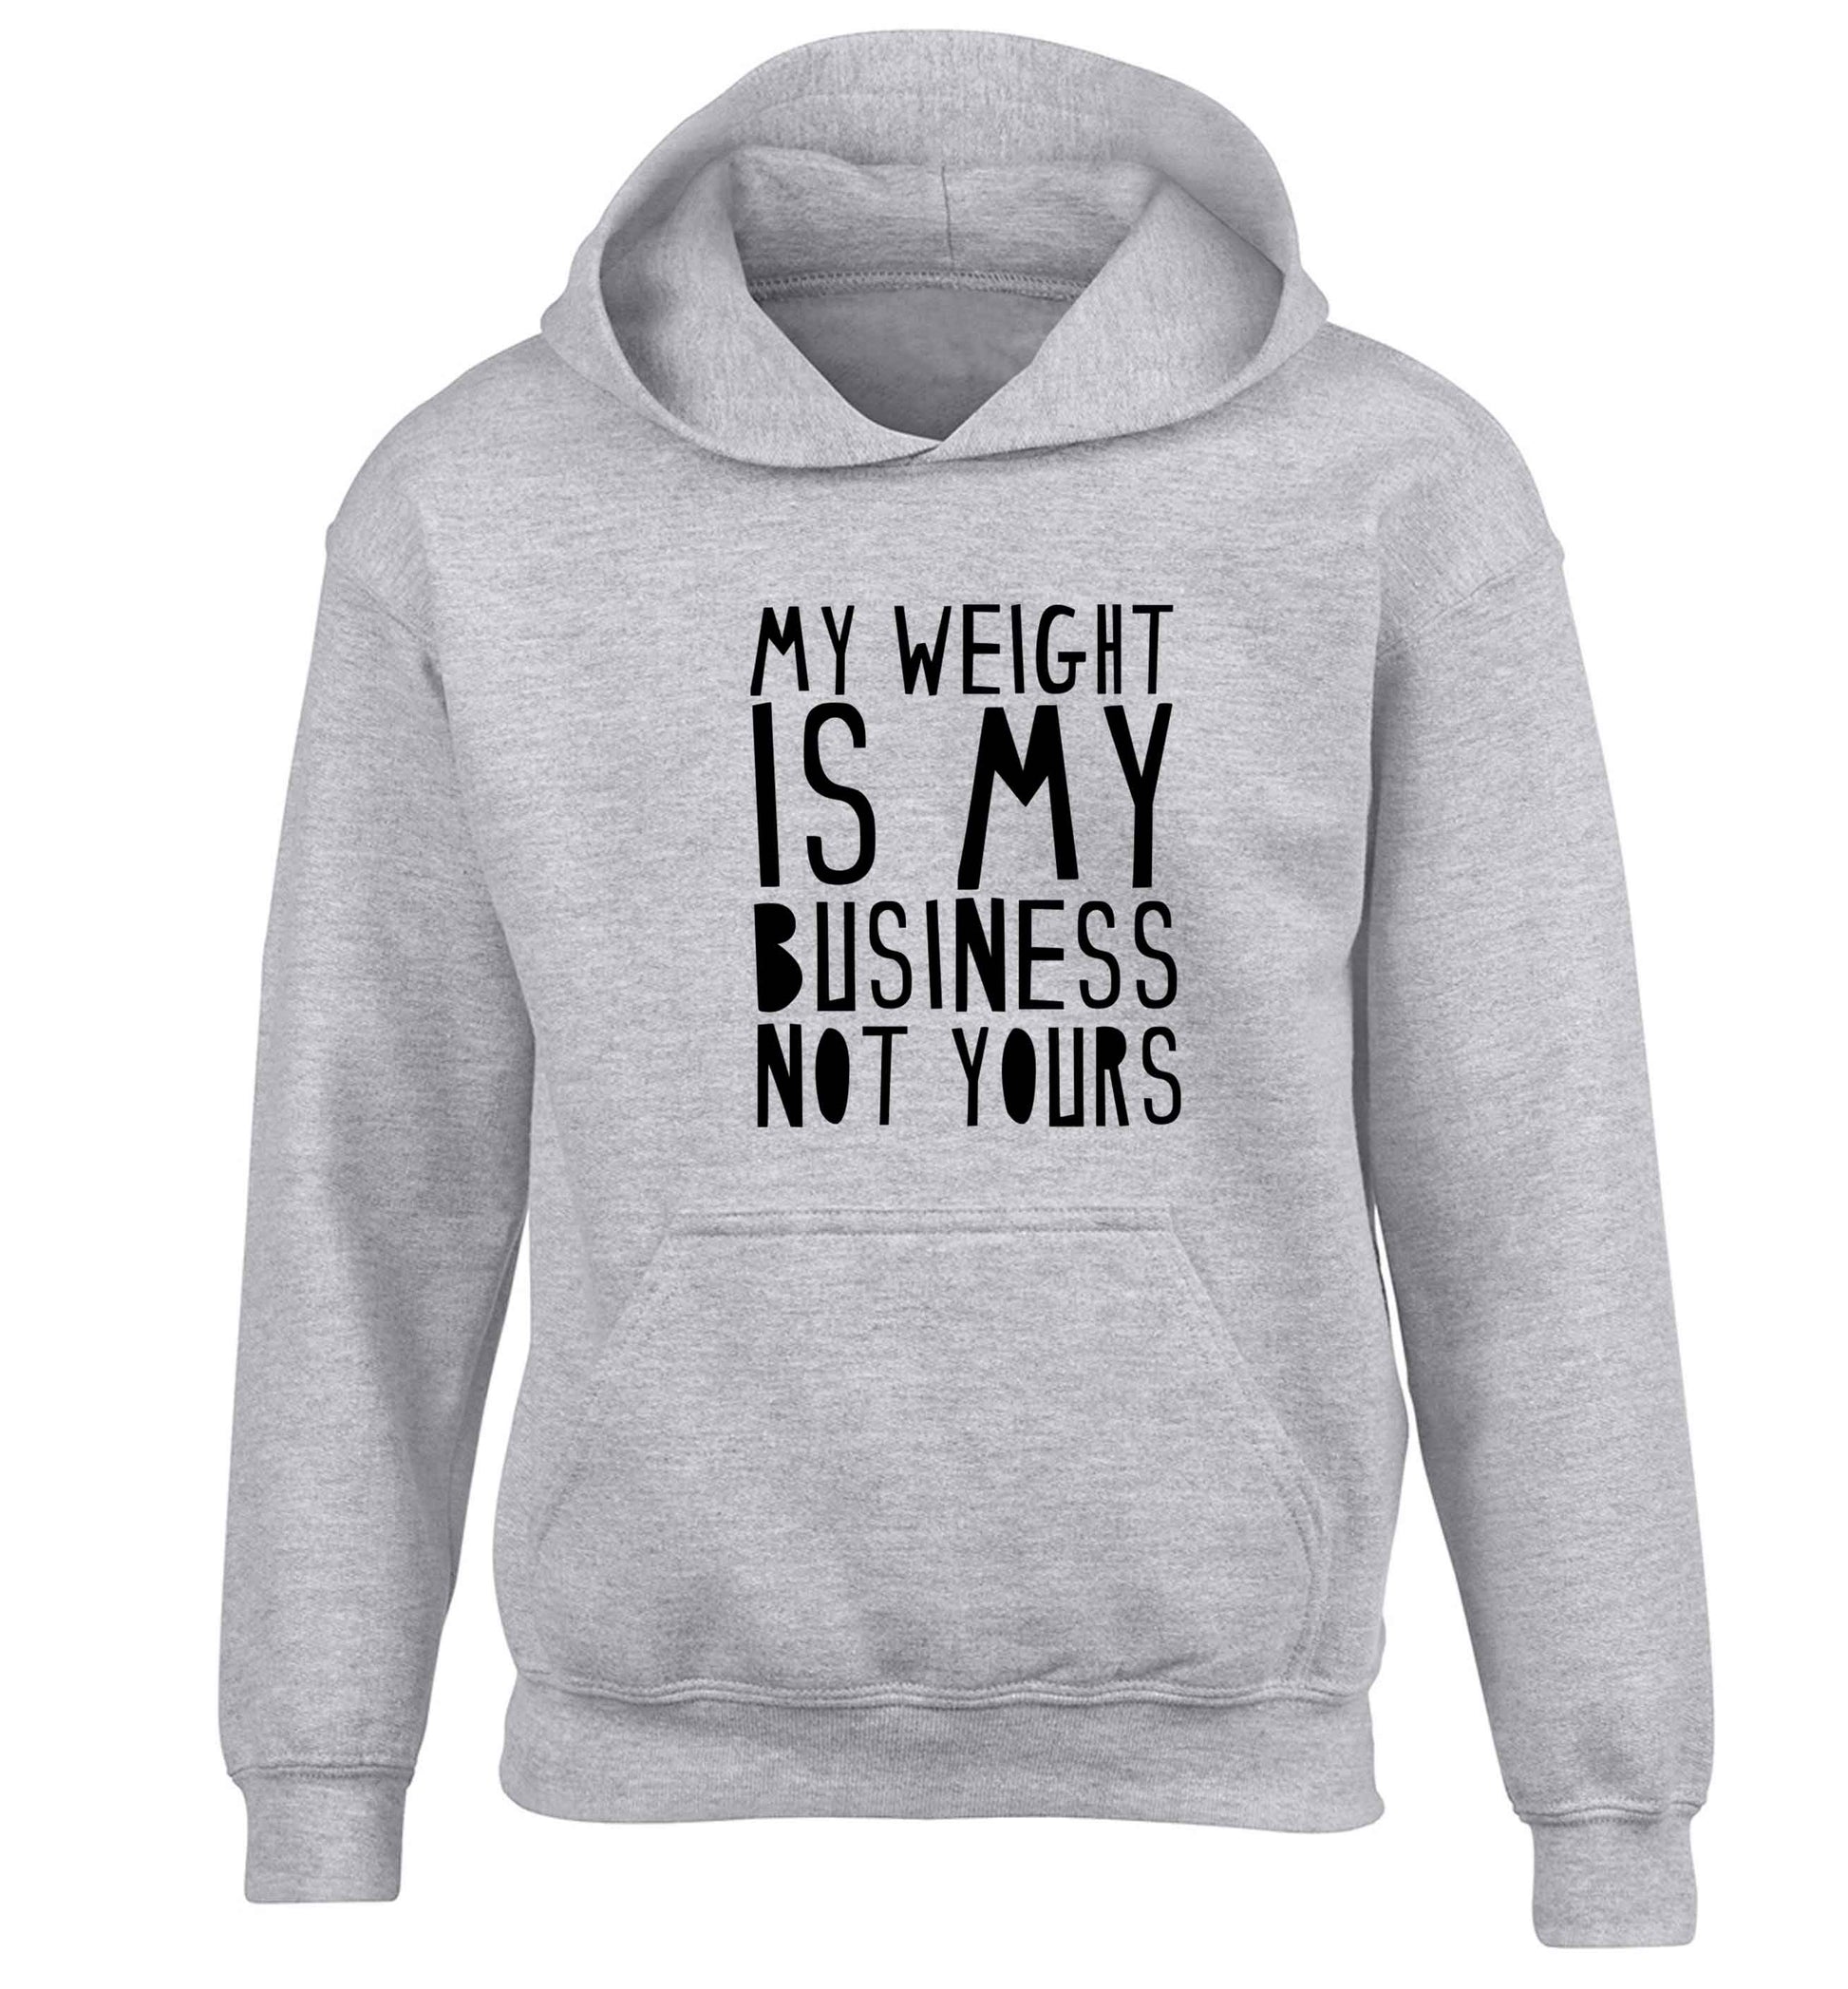 My weight is my business not yours children's grey hoodie 12-13 Years